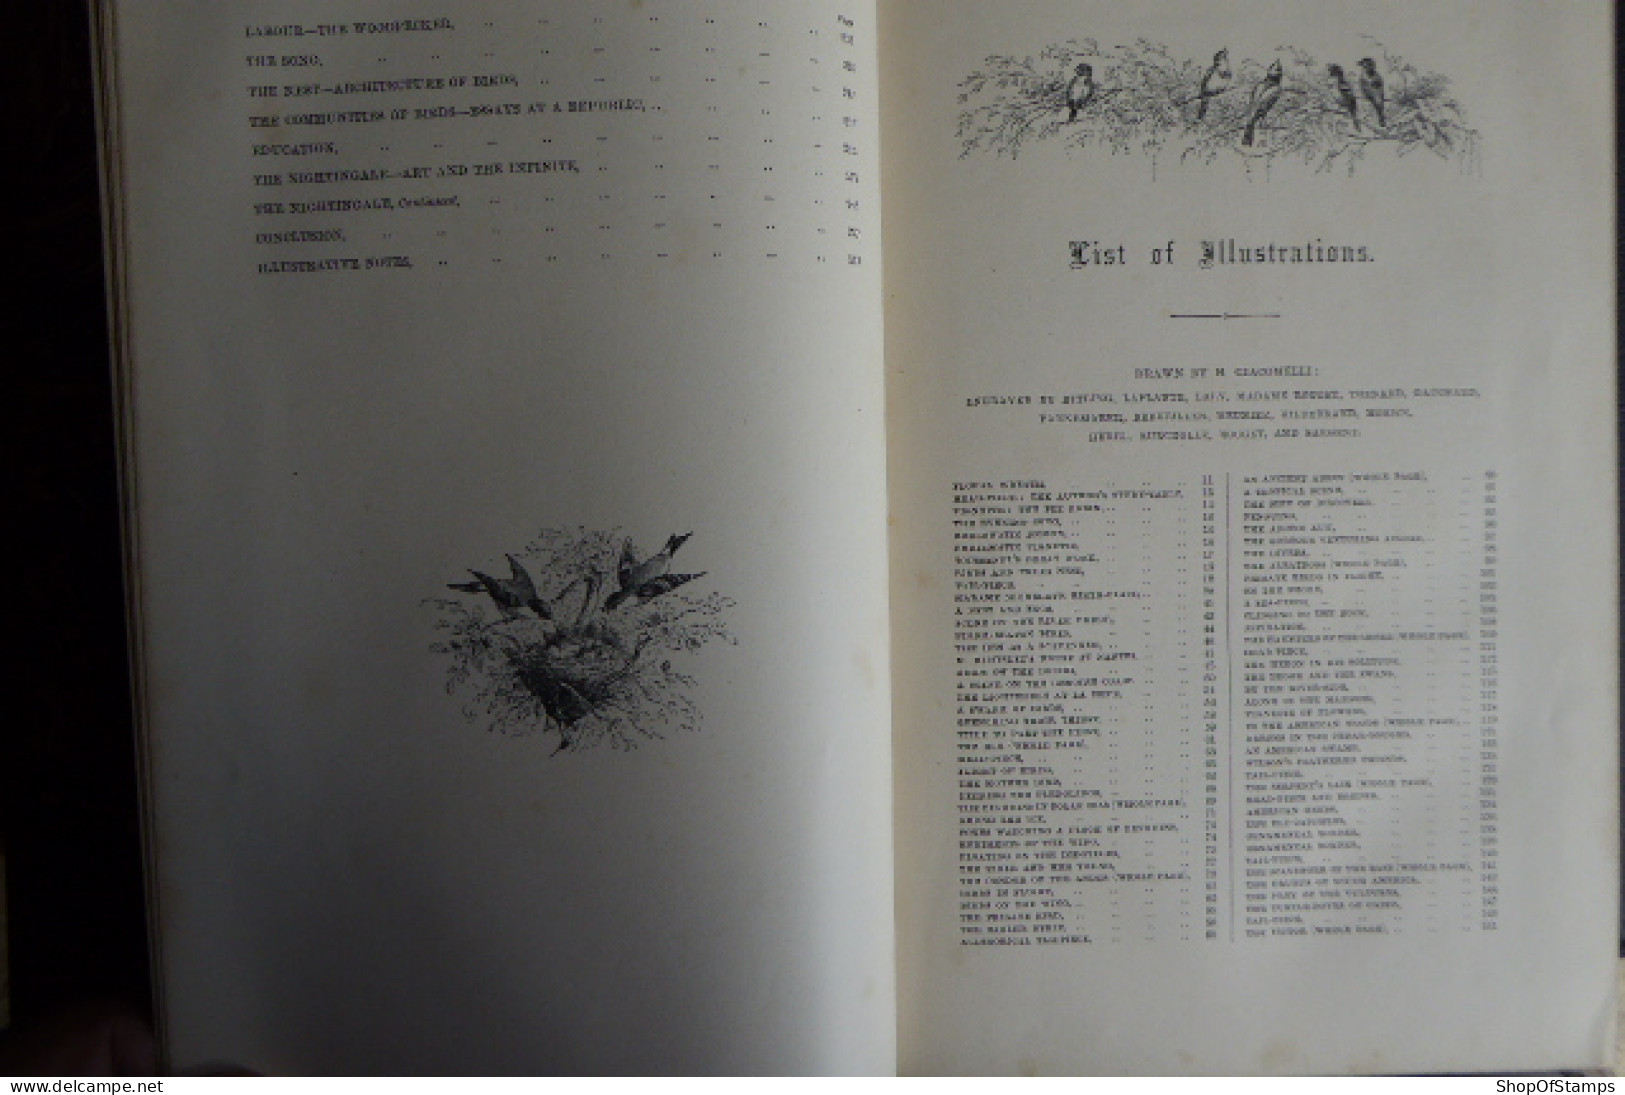 BOOK; THE BIRD By JULES MICHELET Collar BROKEN 1872 With 210 Illustrations By GIACOMELLI - Vie Sauvage